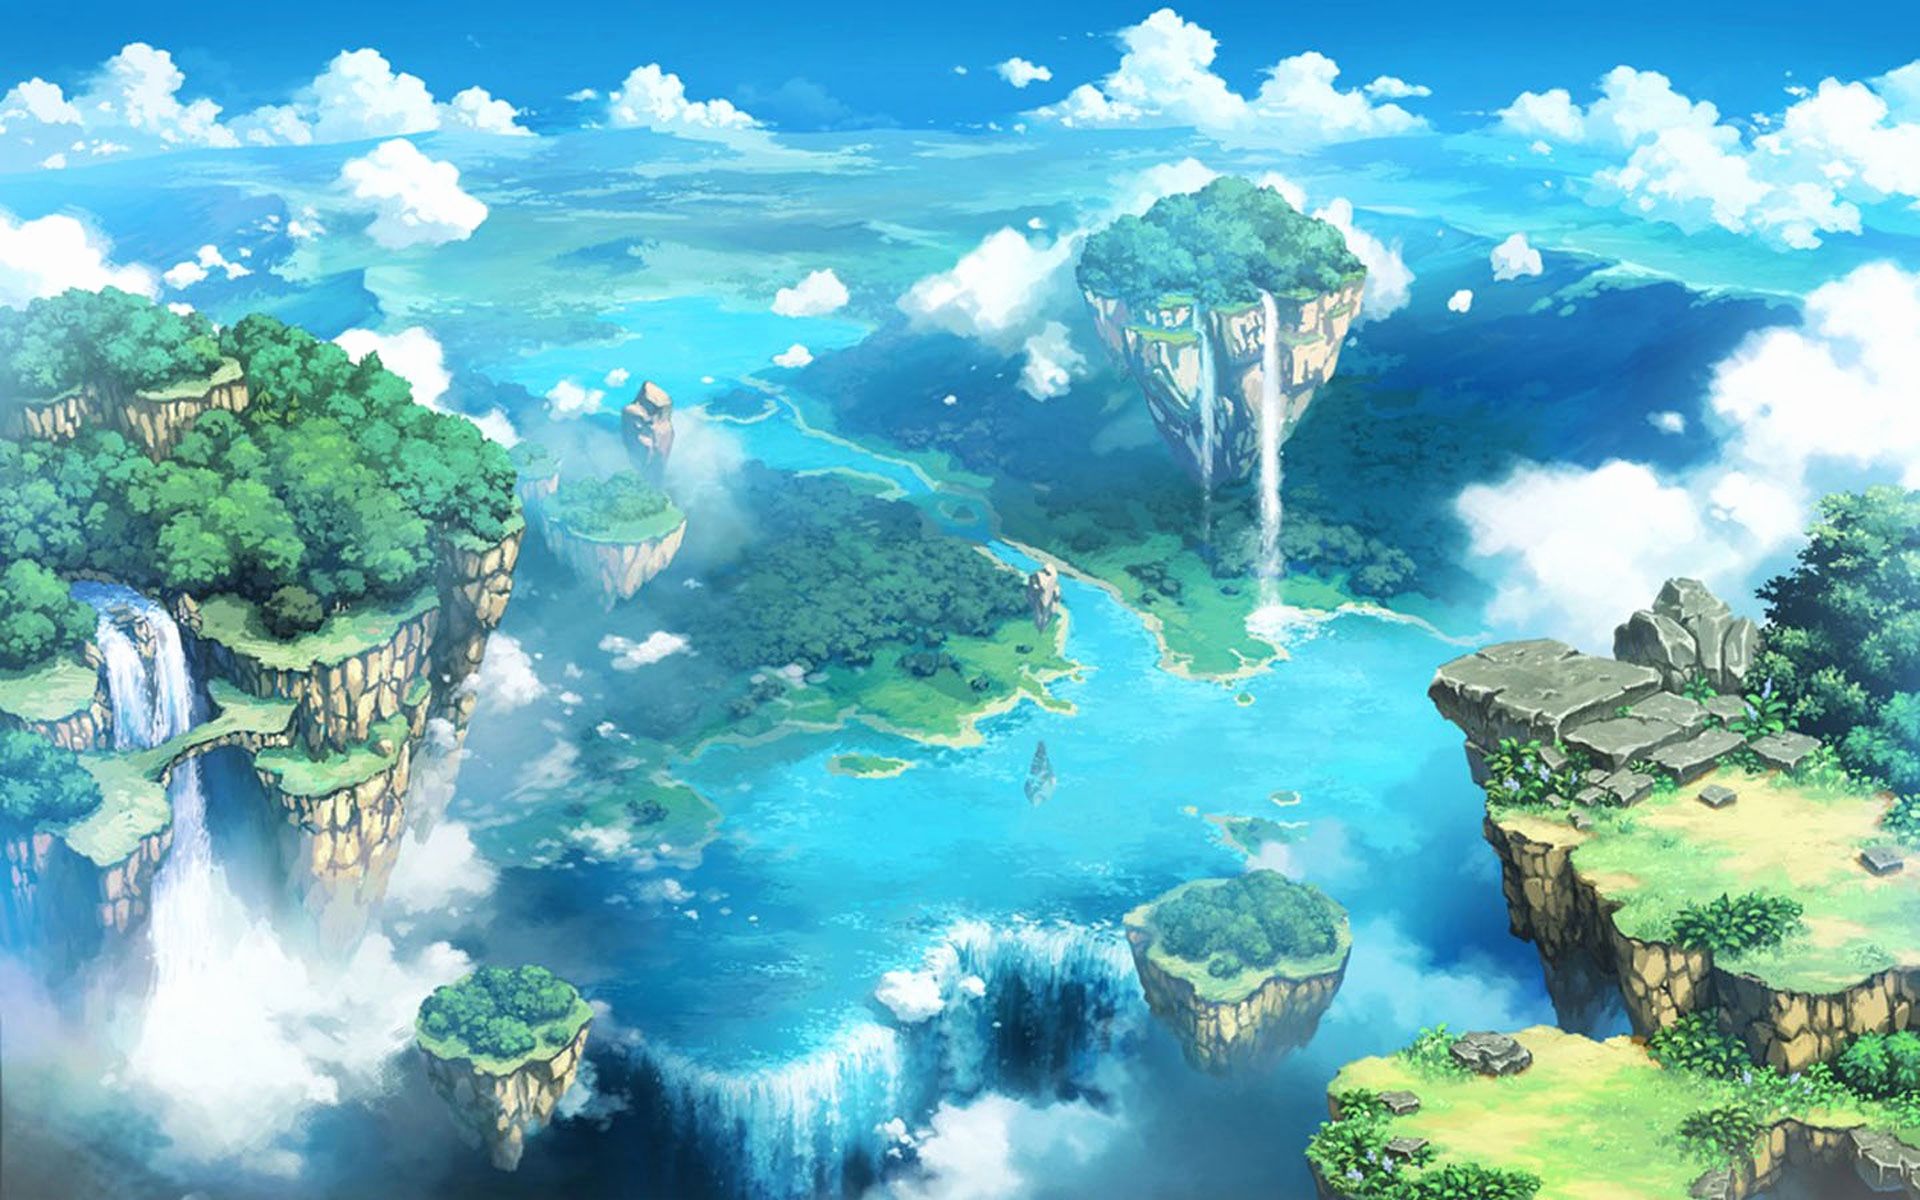 Anime Landscape Awesome Anime Scenery Wallpaper HD Inspiration of The Hudson